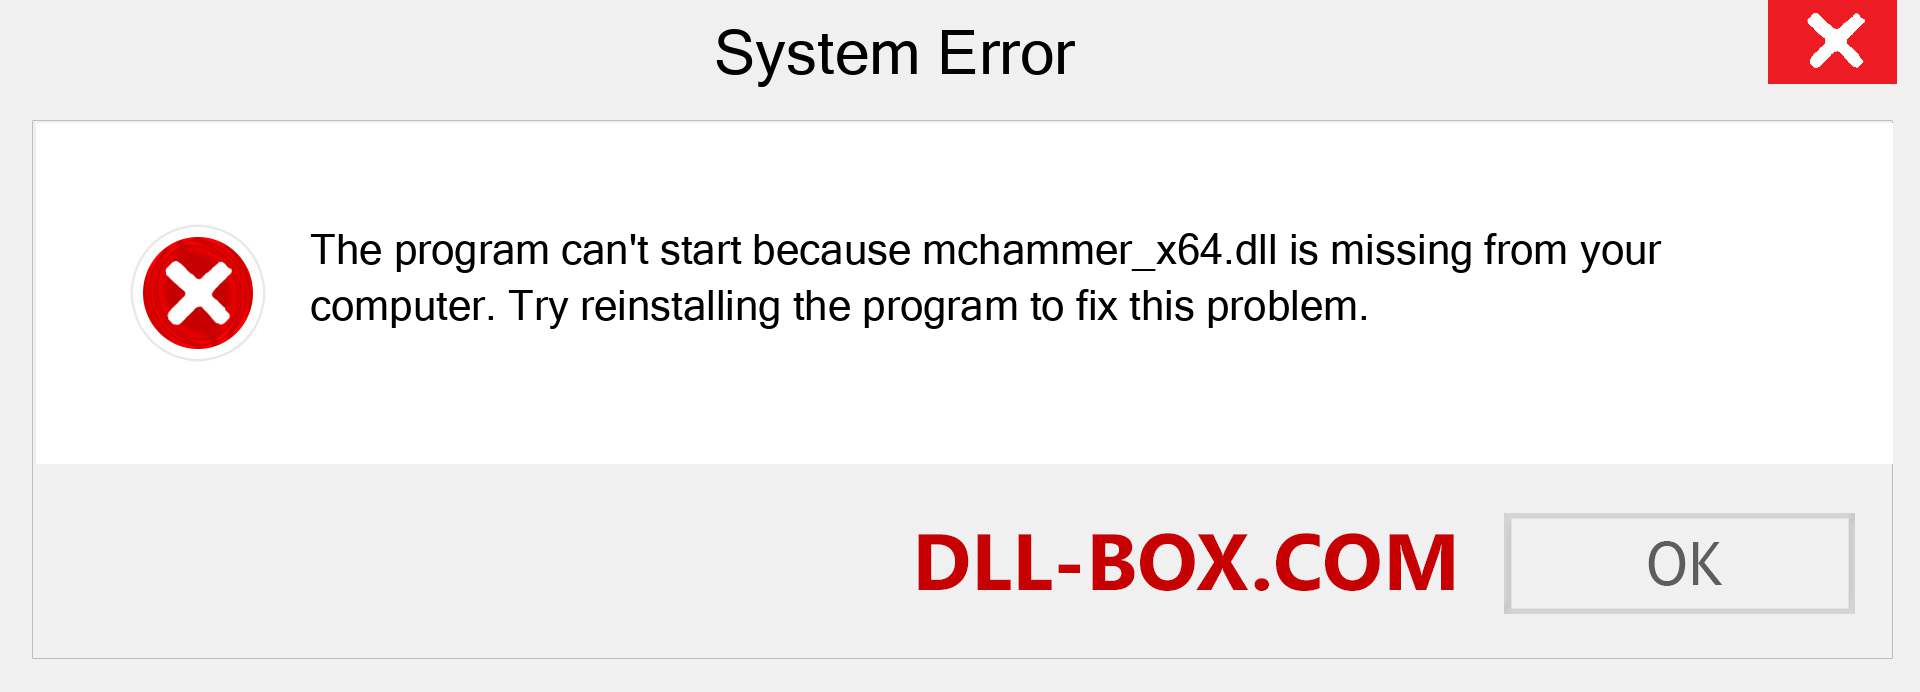  mchammer_x64.dll file is missing?. Download for Windows 7, 8, 10 - Fix  mchammer_x64 dll Missing Error on Windows, photos, images